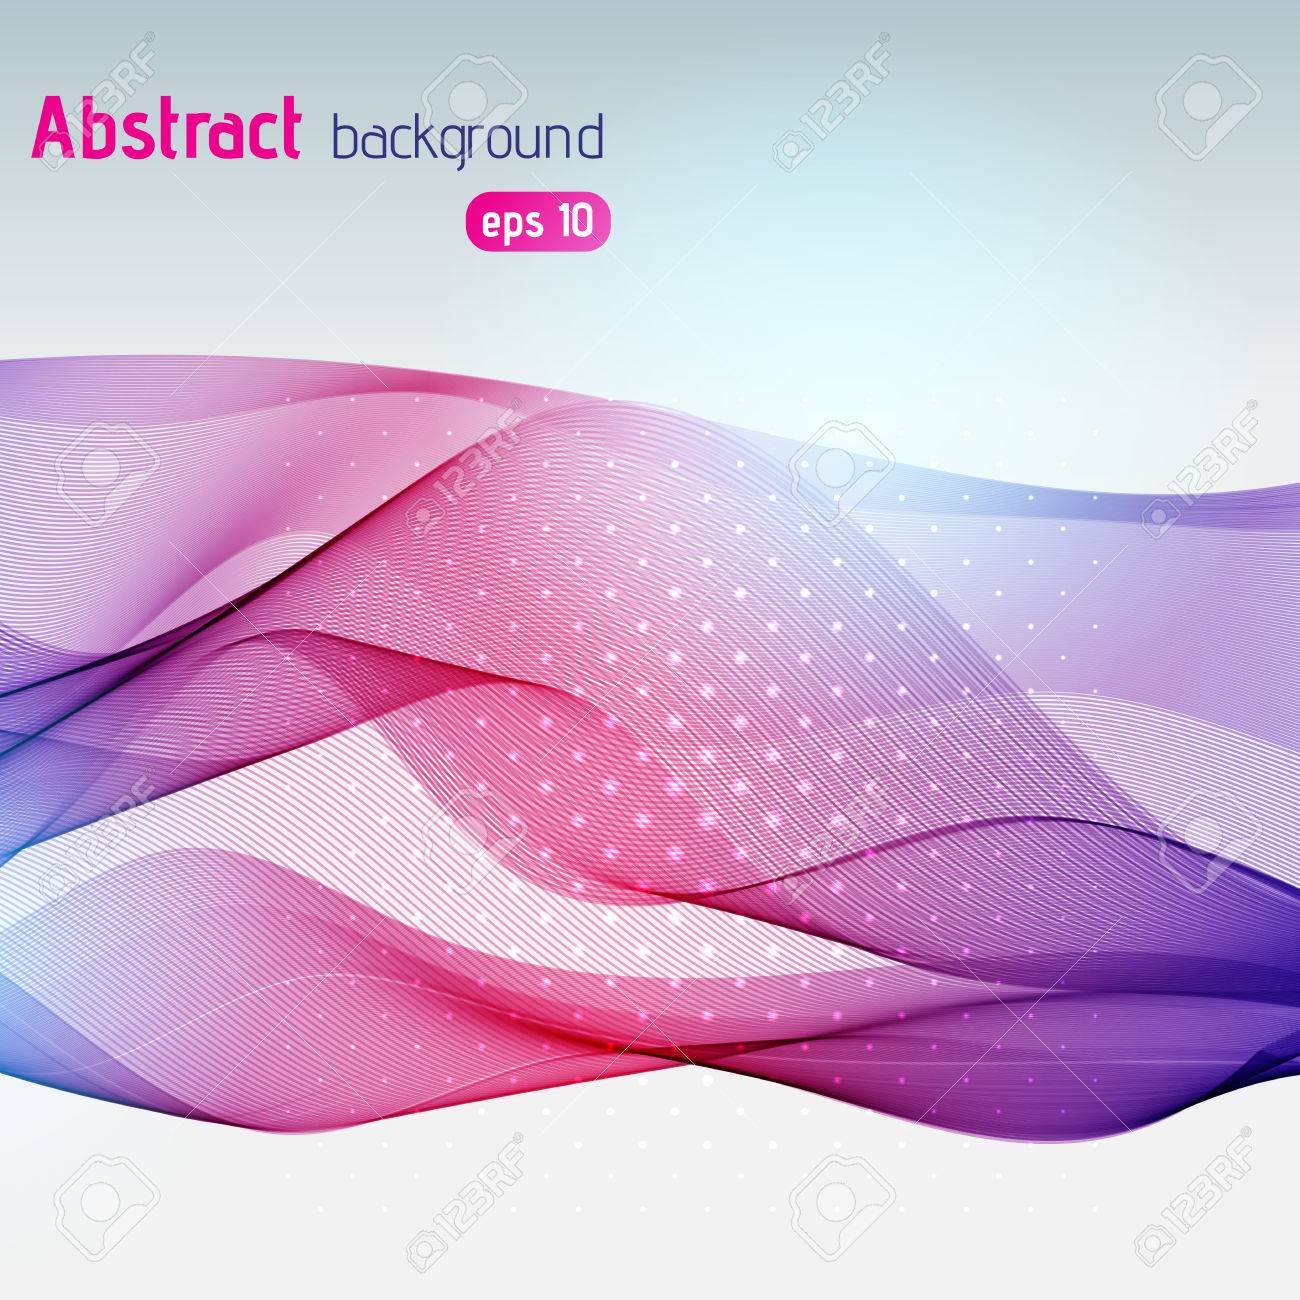 Colorful Waves Of Line Art Wallpapers